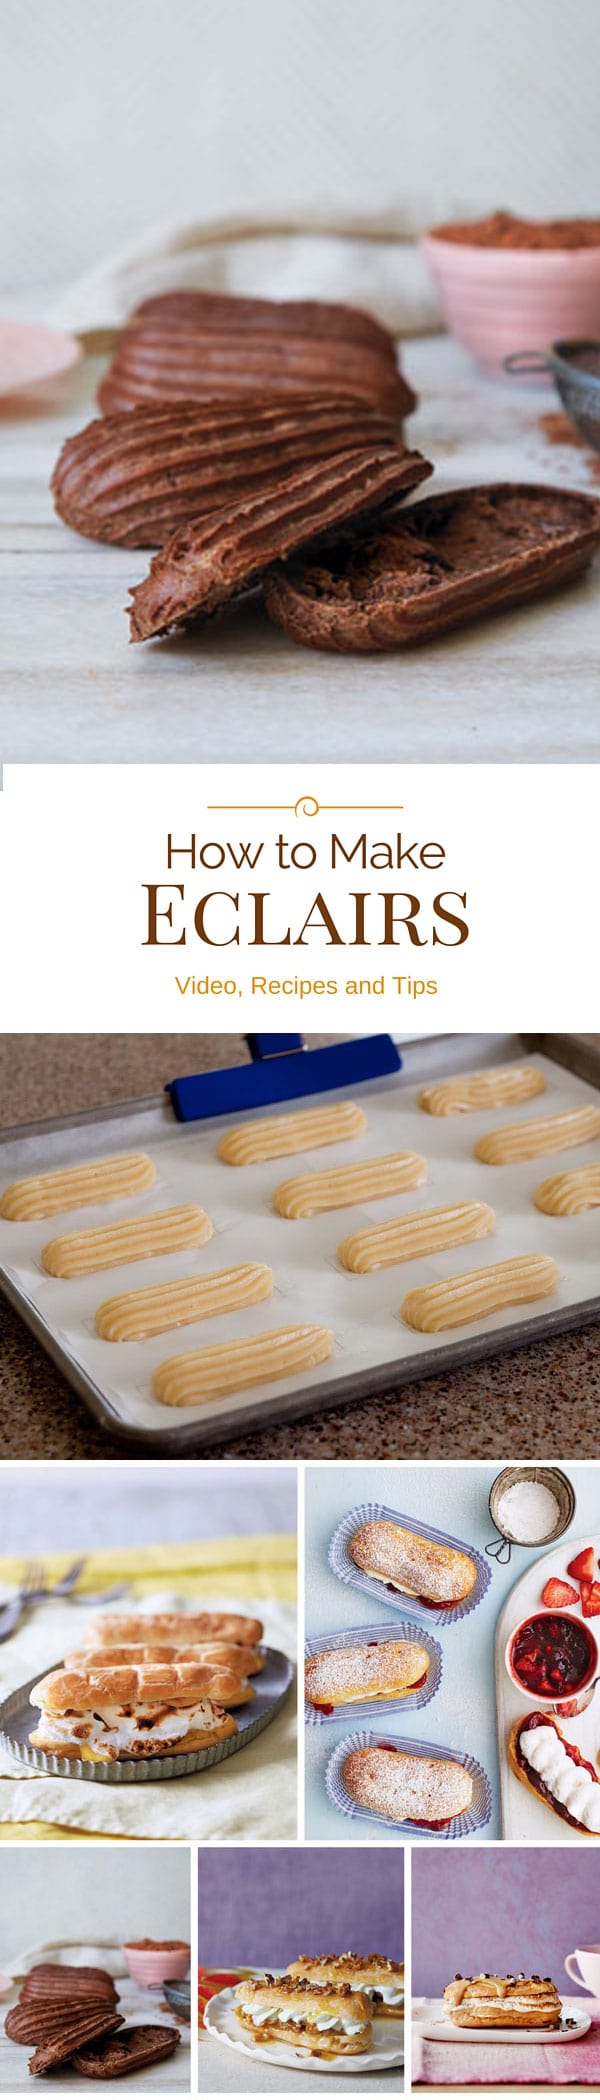 /How-to-Make-Eclairs-Collage